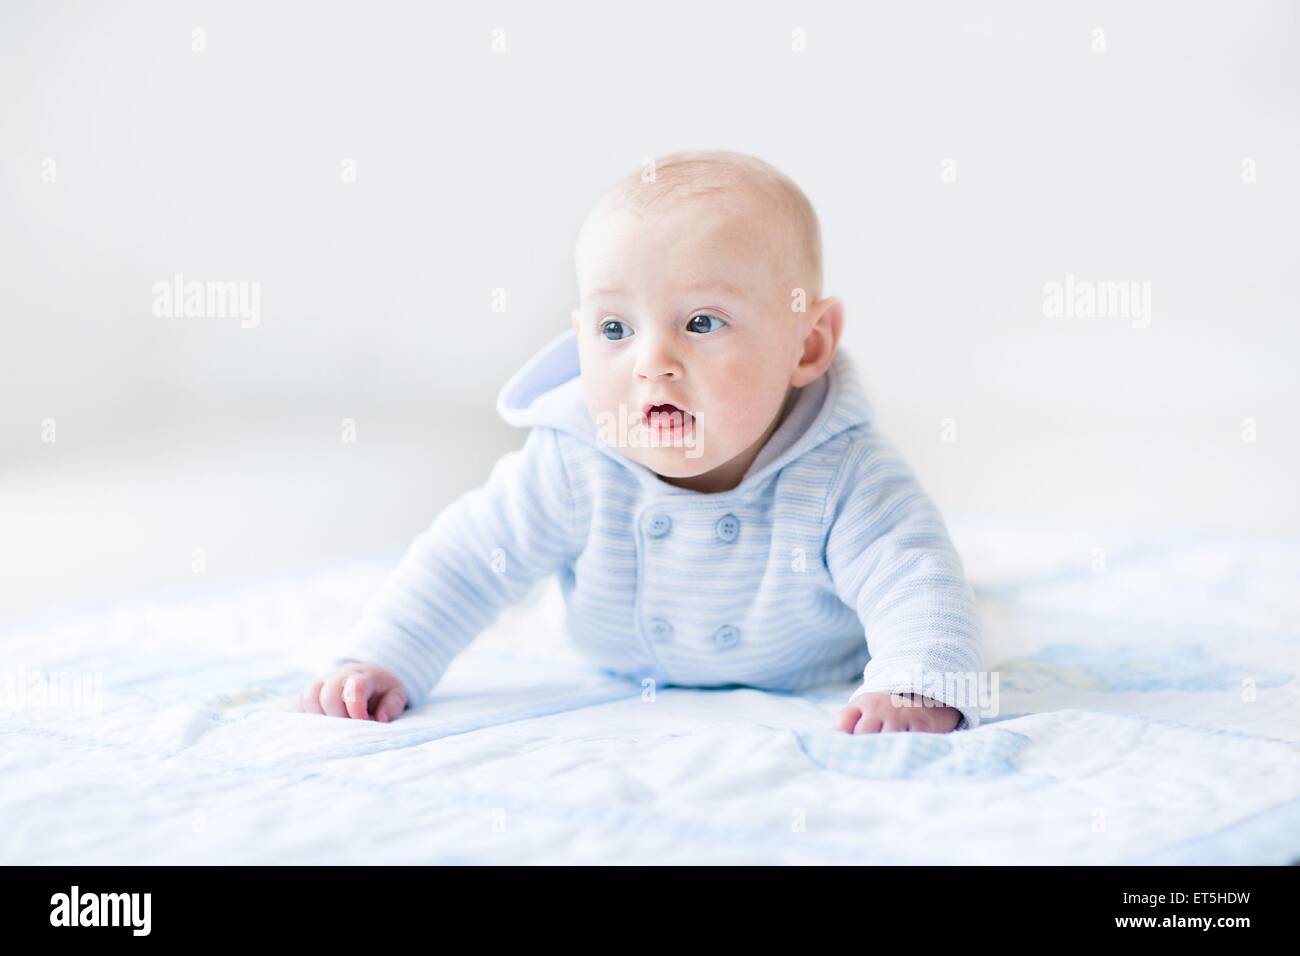 9,719 Tummy Time Images, Stock Photos, 3D objects, & Vectors